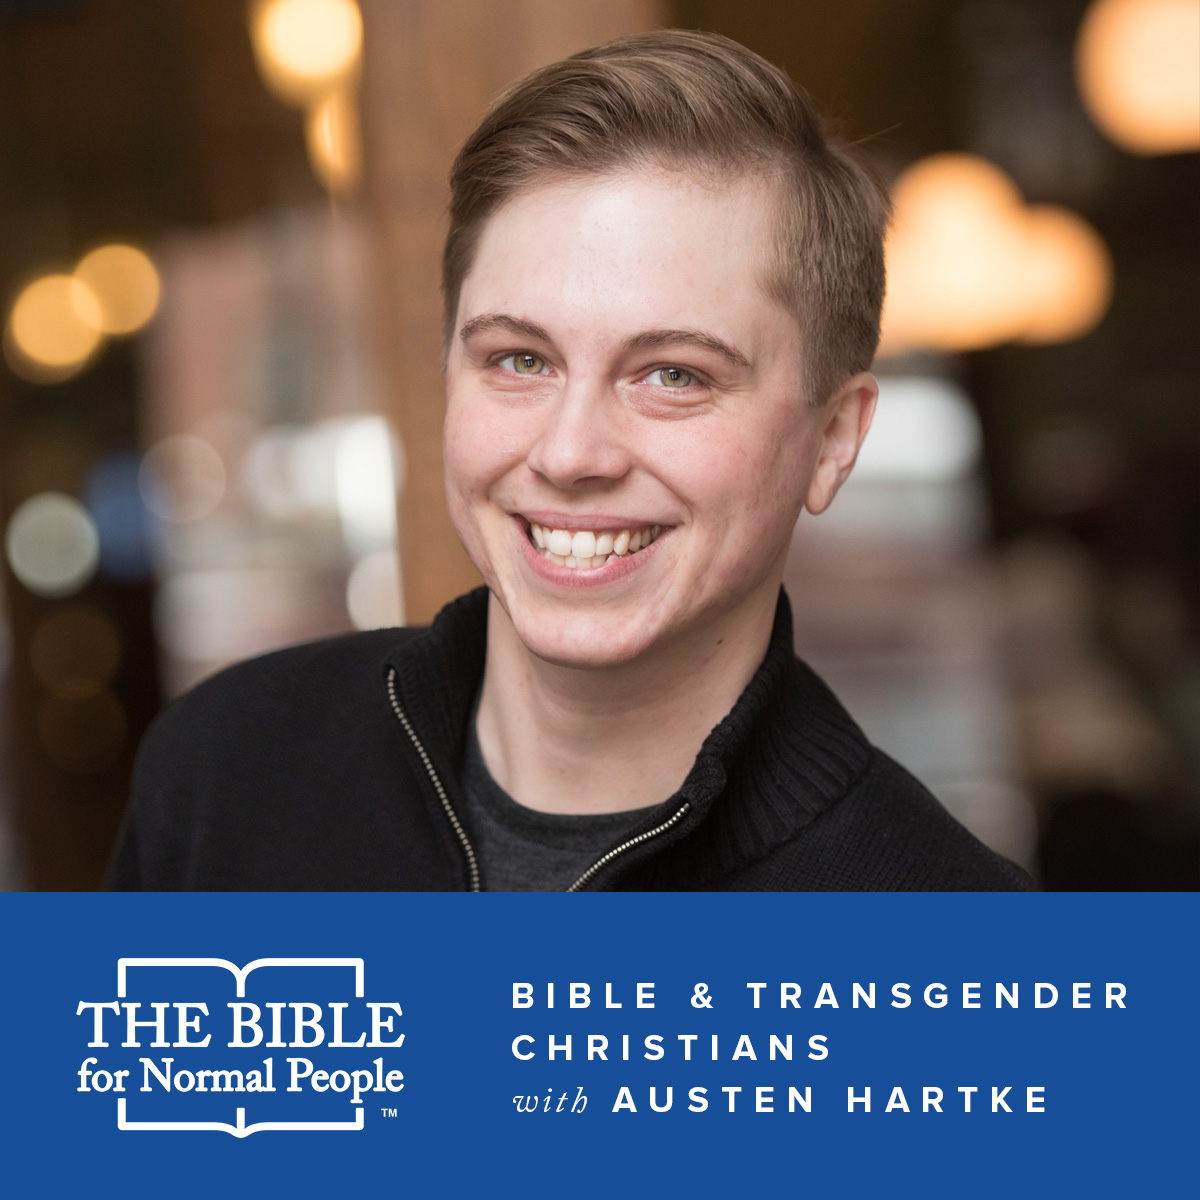 Interview with Austen Hartke: The Bible & The Lives of Transgender Christians